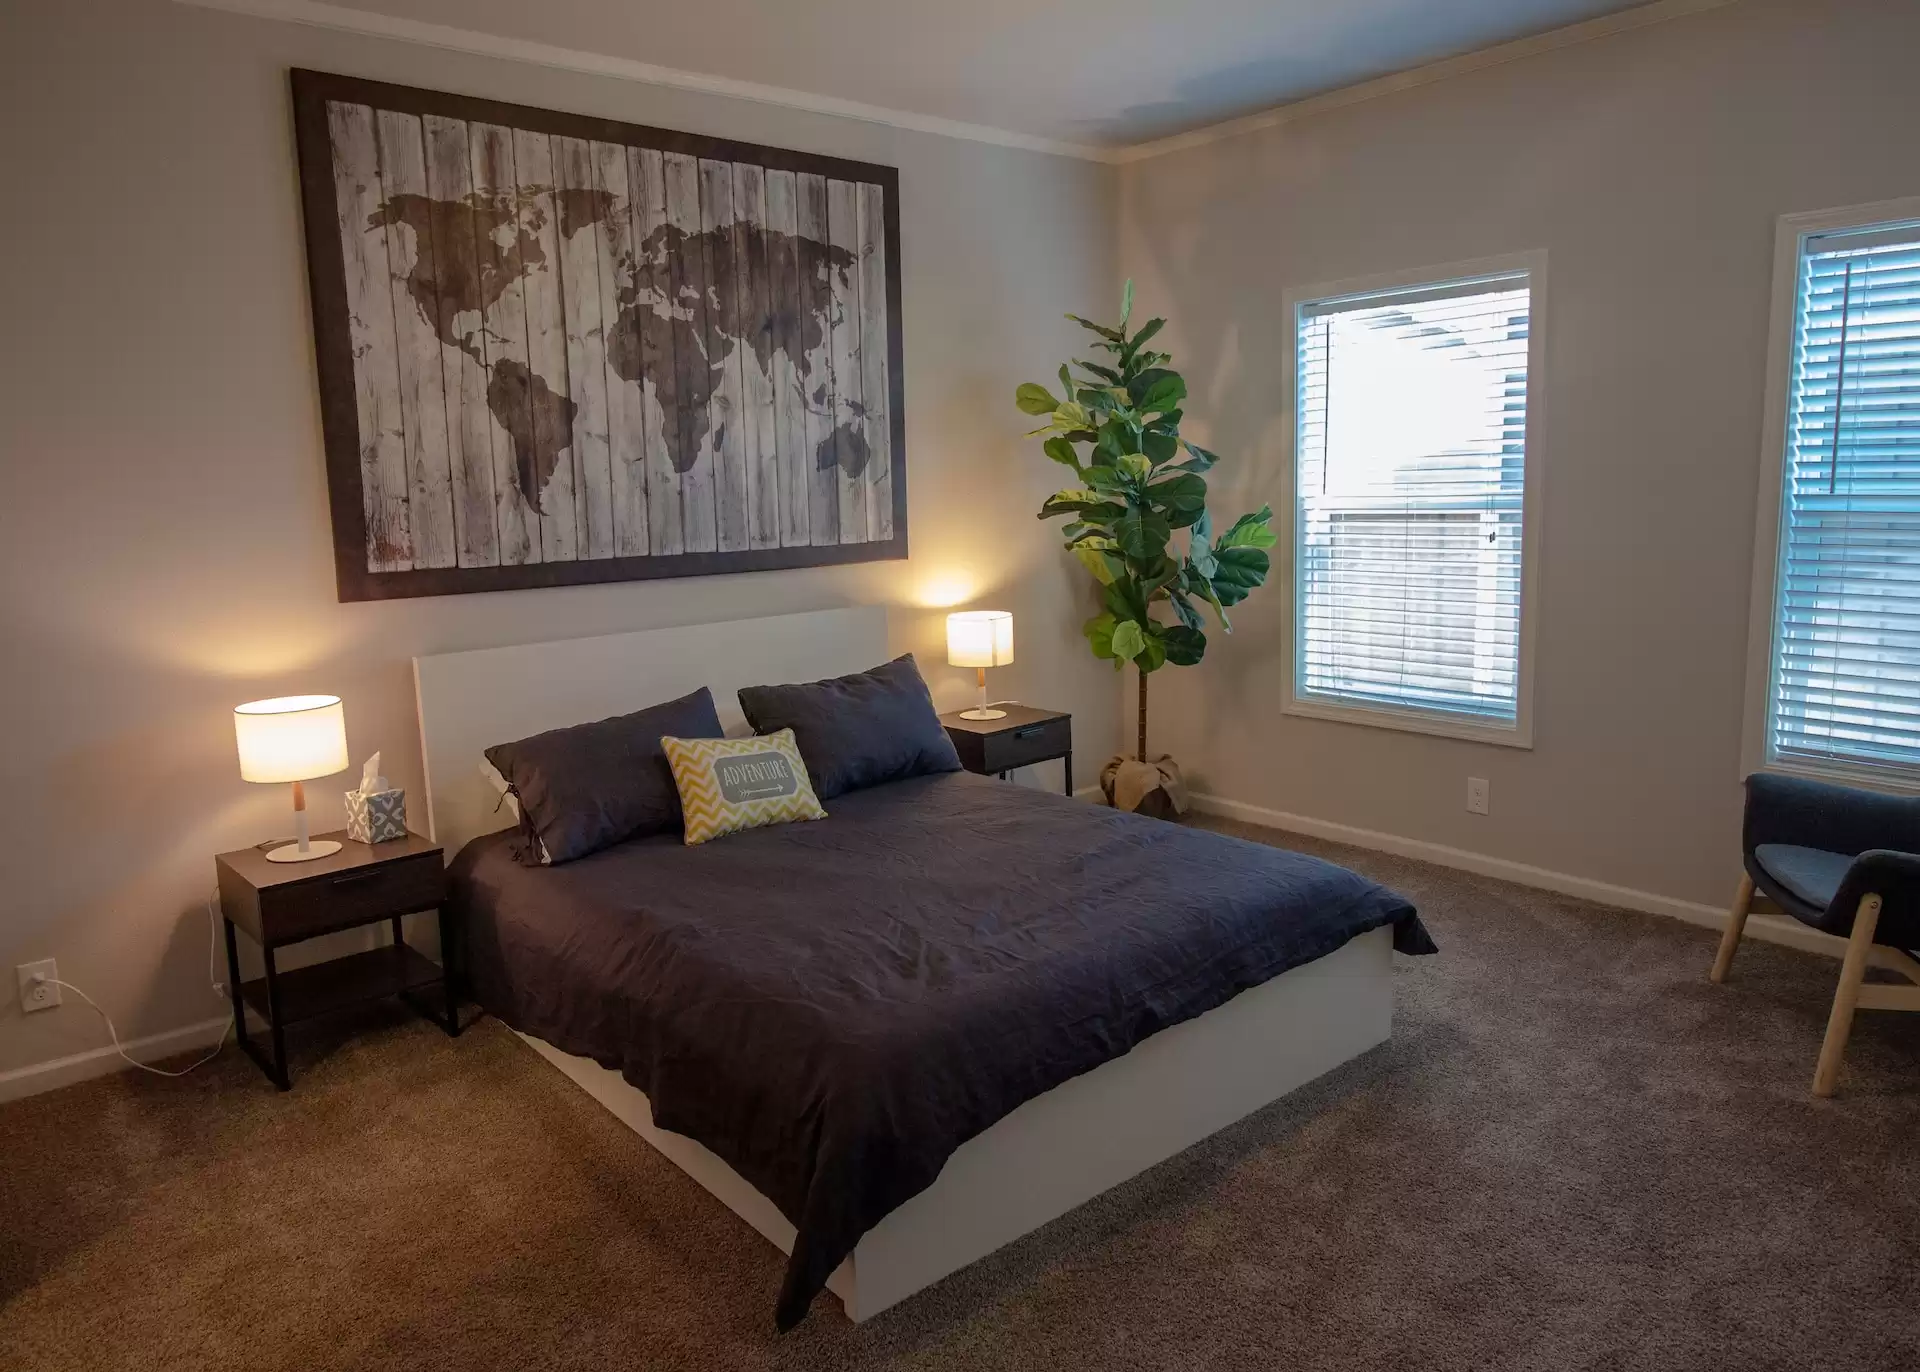 a bedroom featuring furniture rentals, including side tables